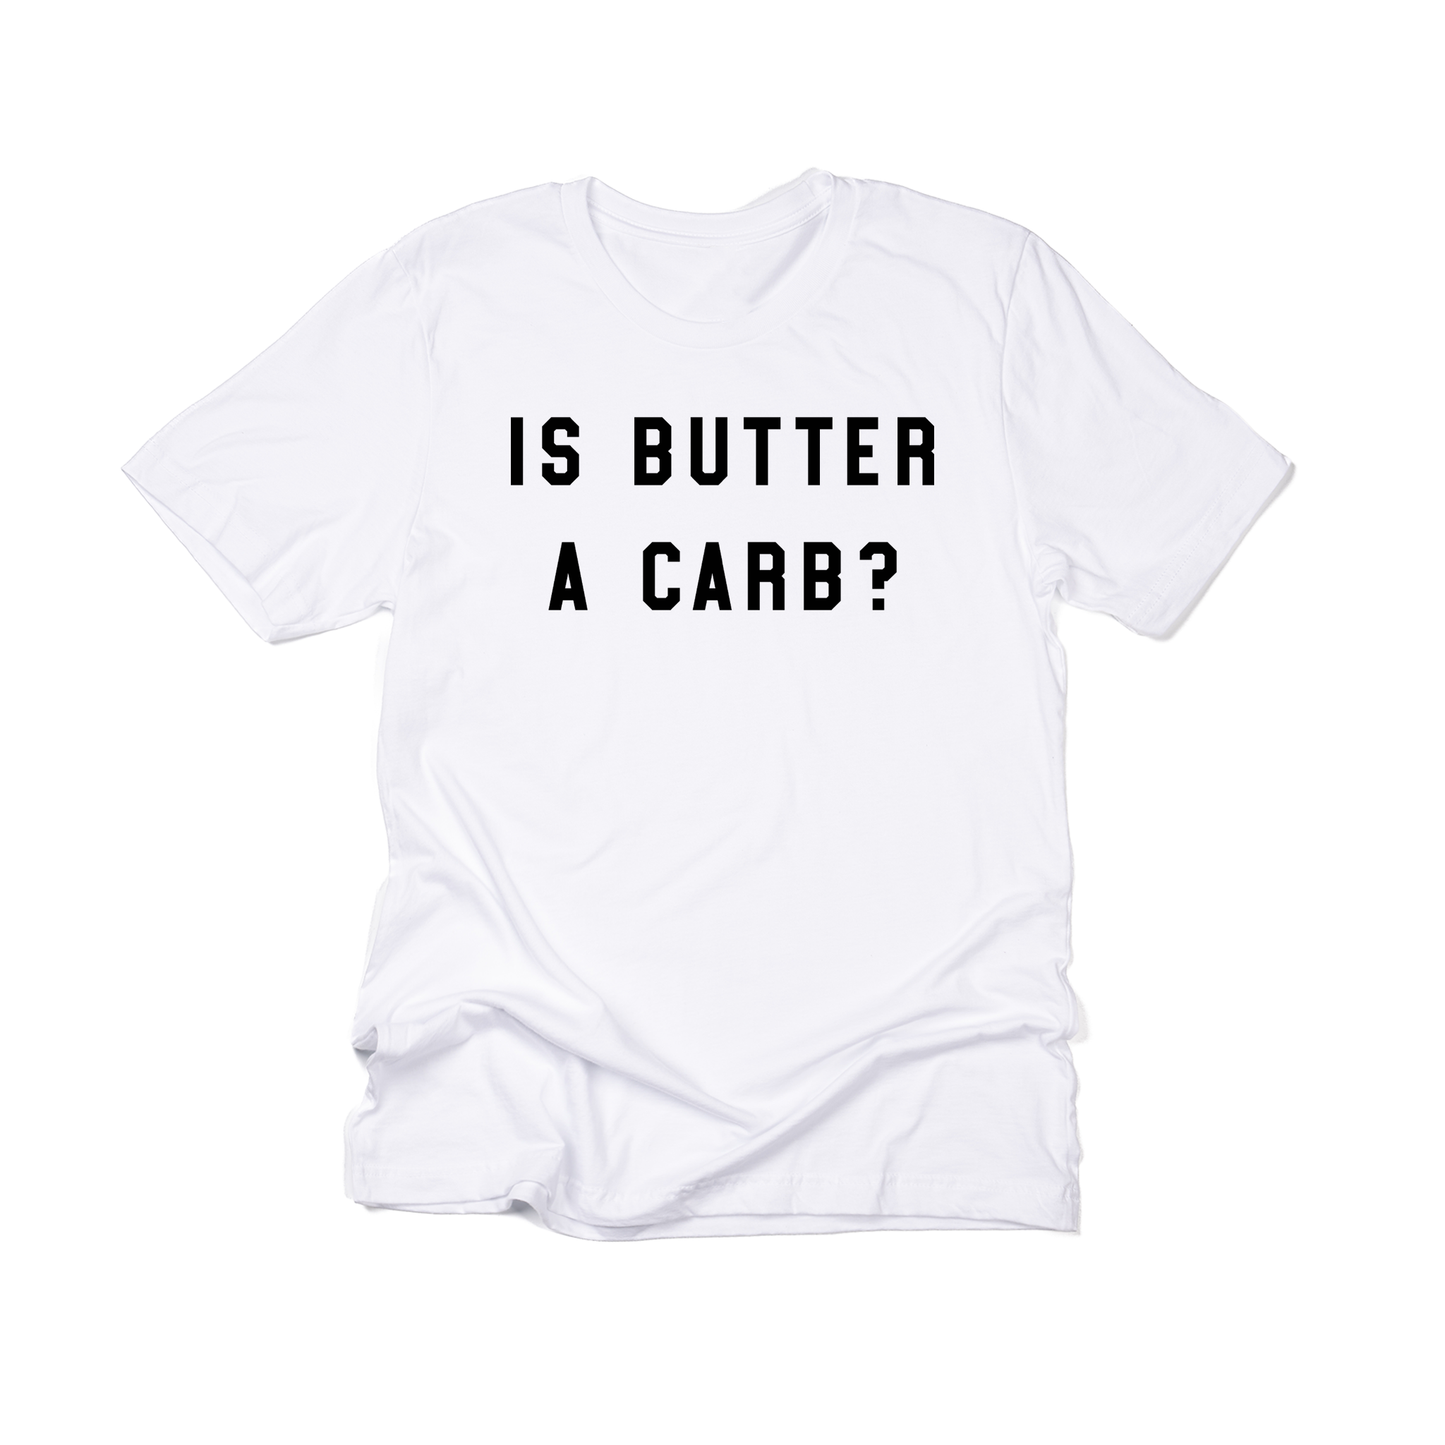 Is butter a carb? (Black) - Tee (White)